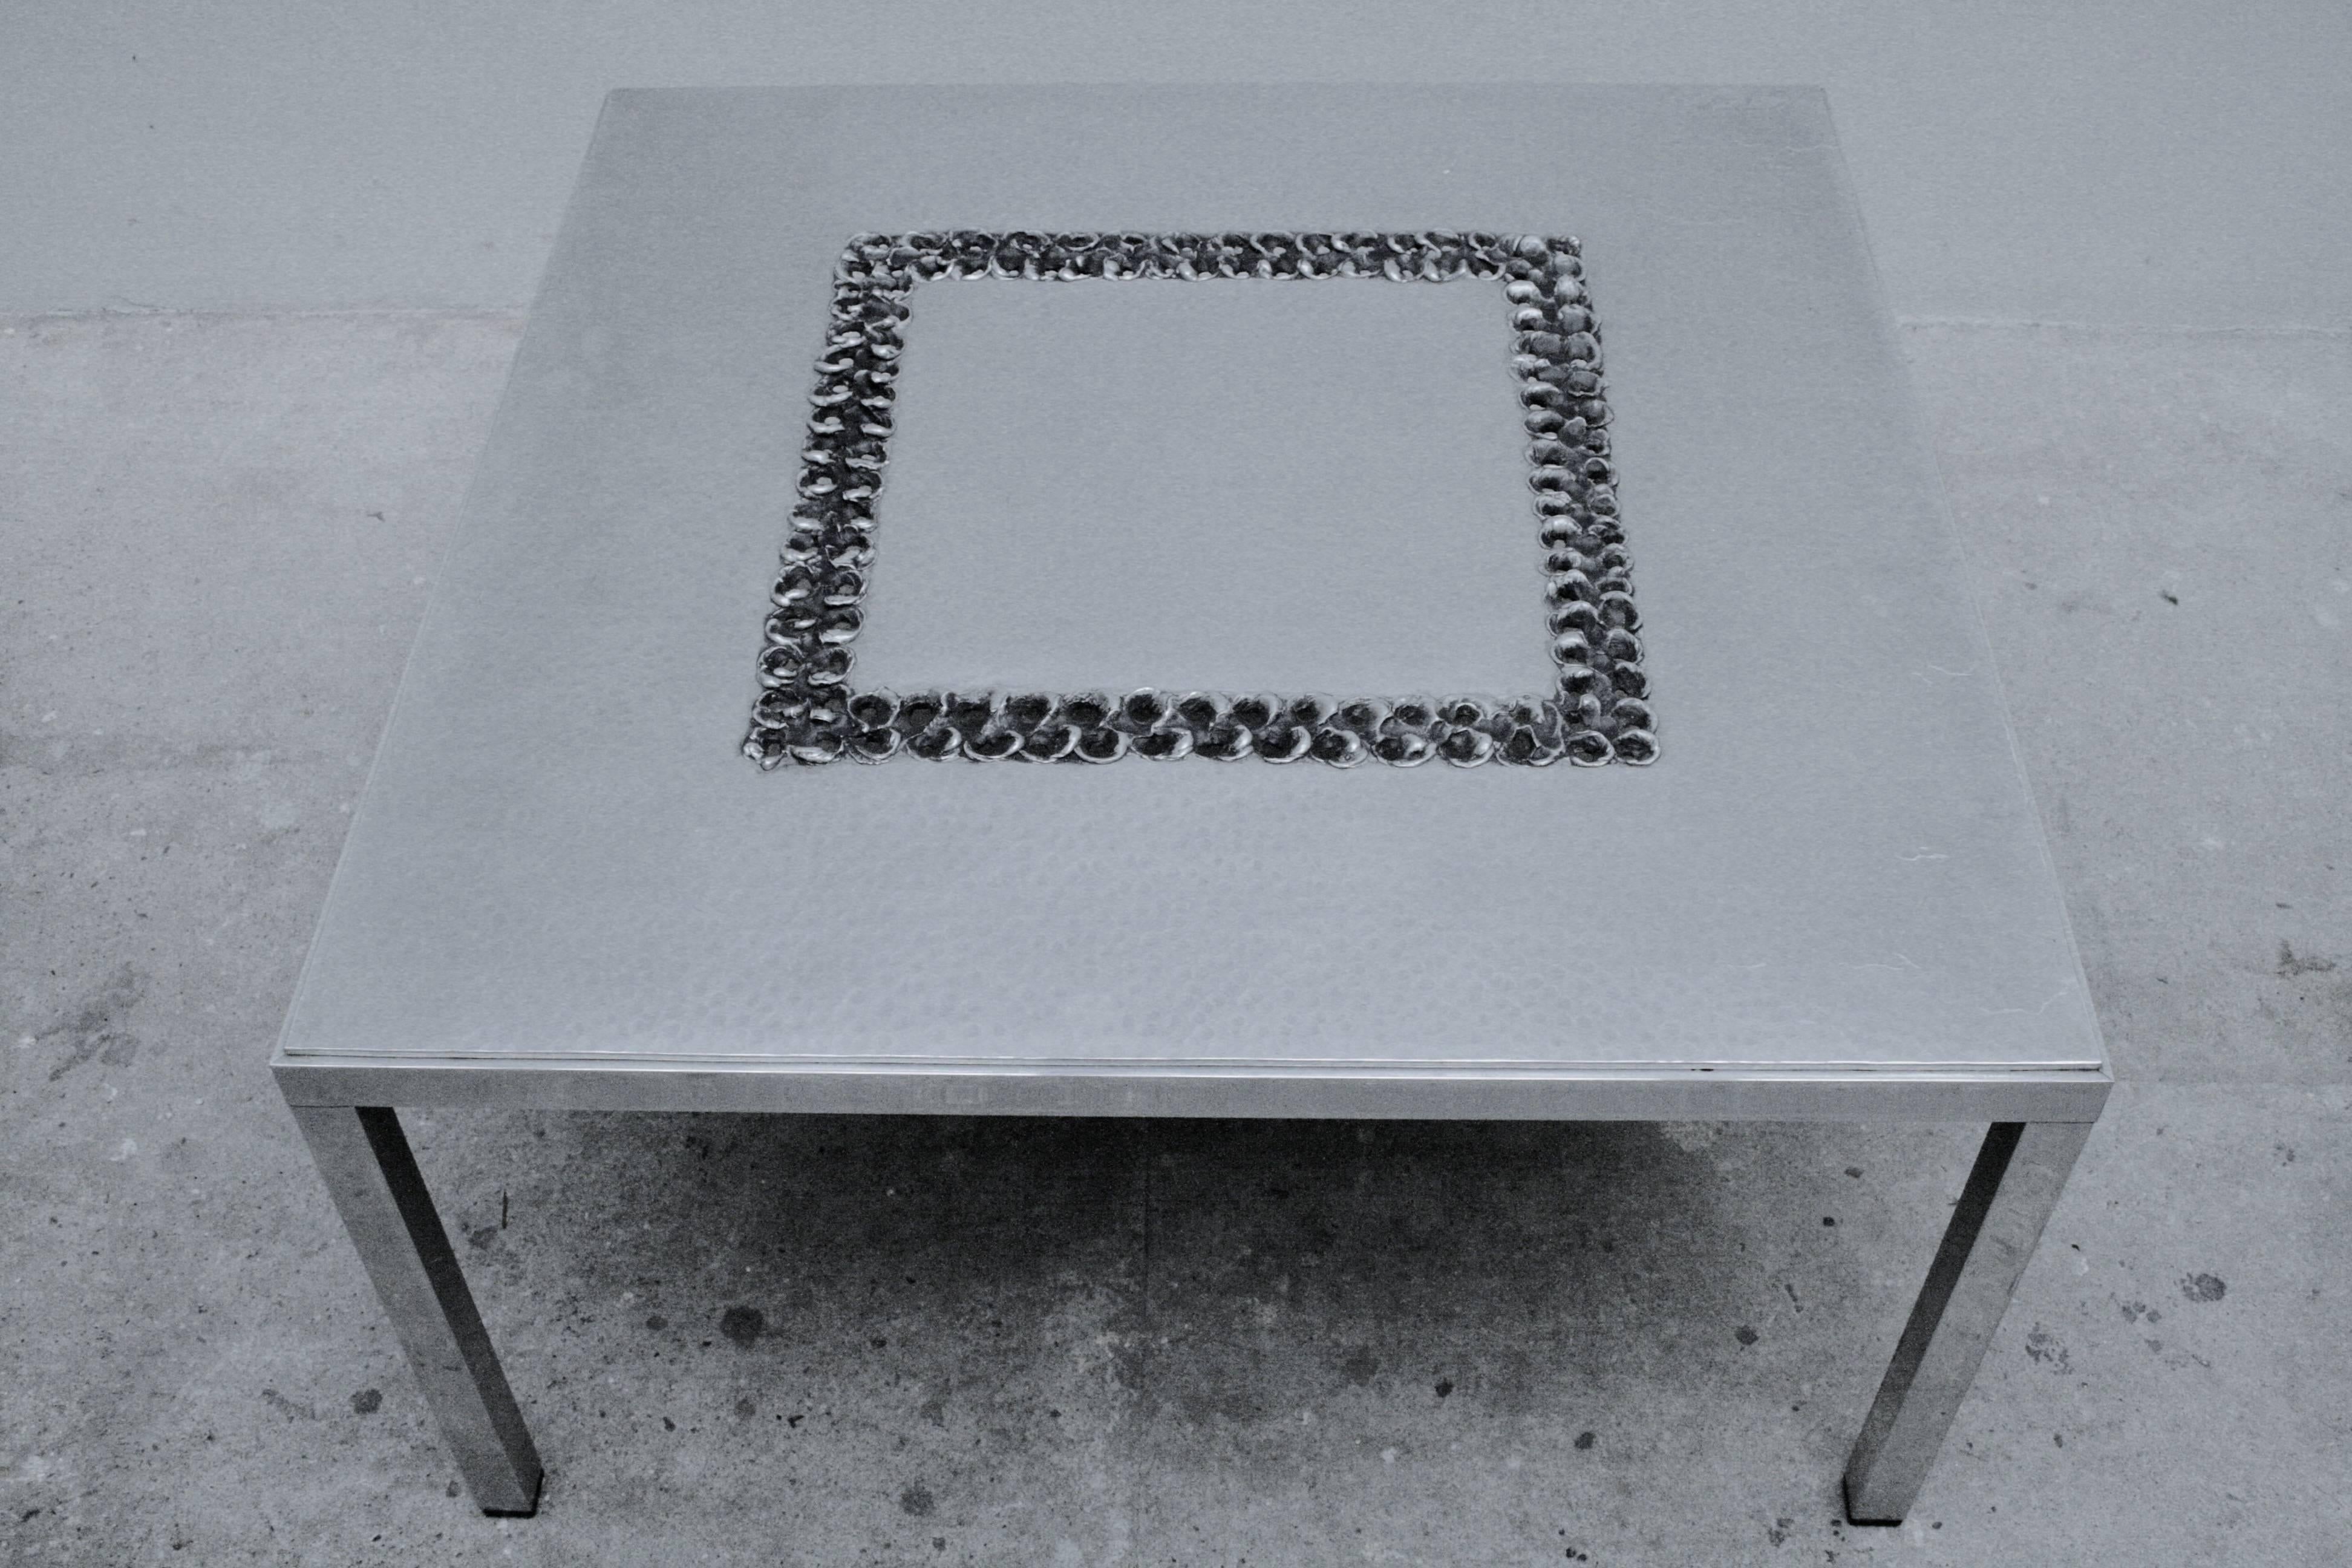 This impressive Brutalist aluminum coffee table was designed by Luyckx W. for Aluclair Belgium in the 1970s. 

This low coffee table is handmade in a special technique with aluminum to create a Brutalist effect.

Labeled by W.Luyckx, ALUCLAIR,